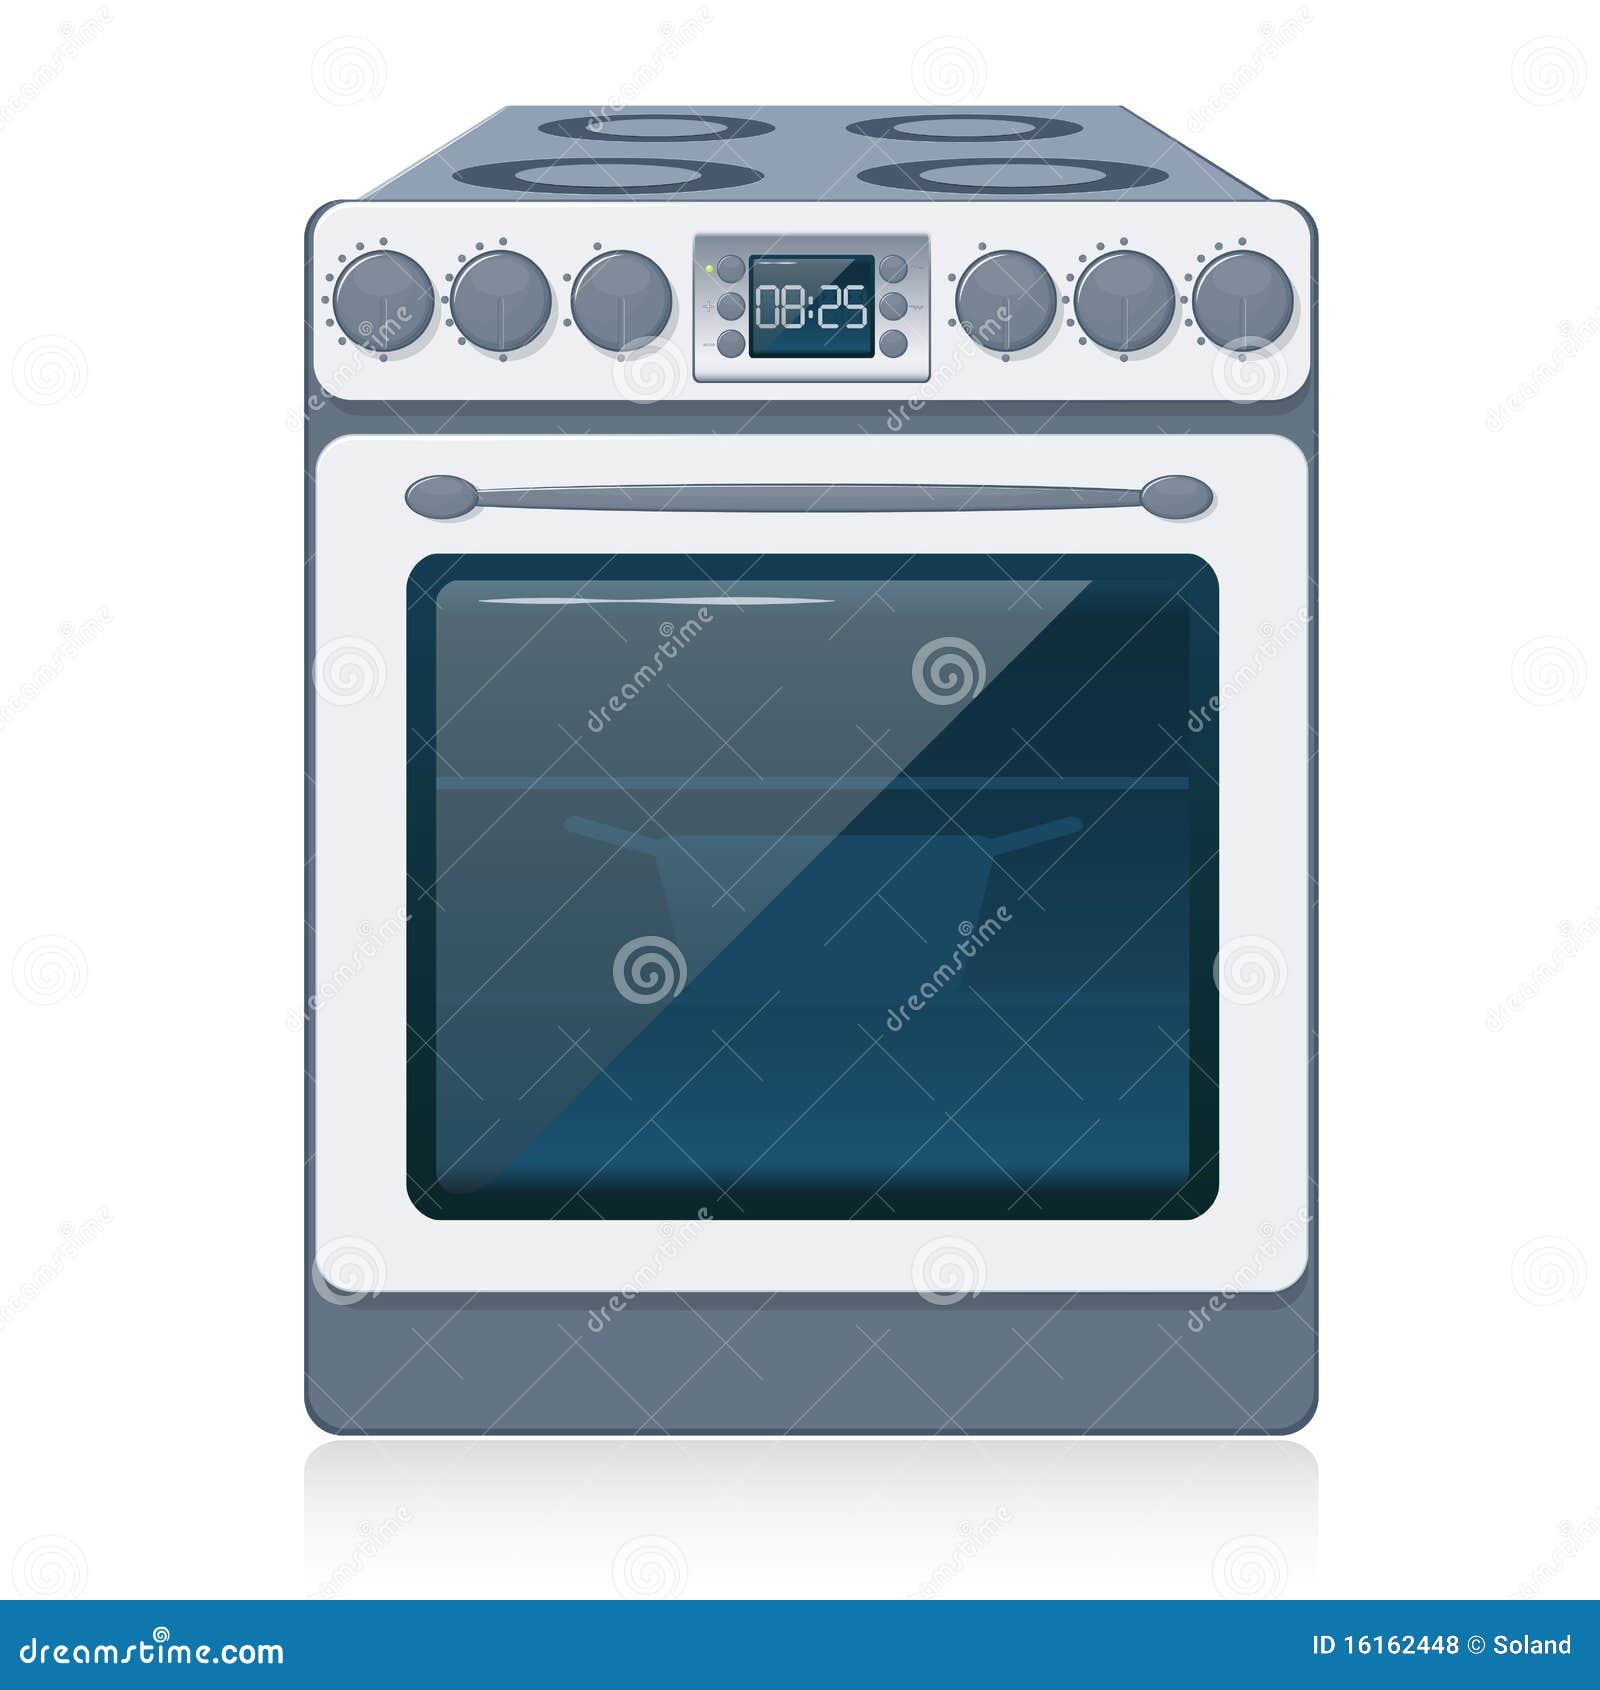 Kitchen Stove Isolated On White. Vector. Stock Vector